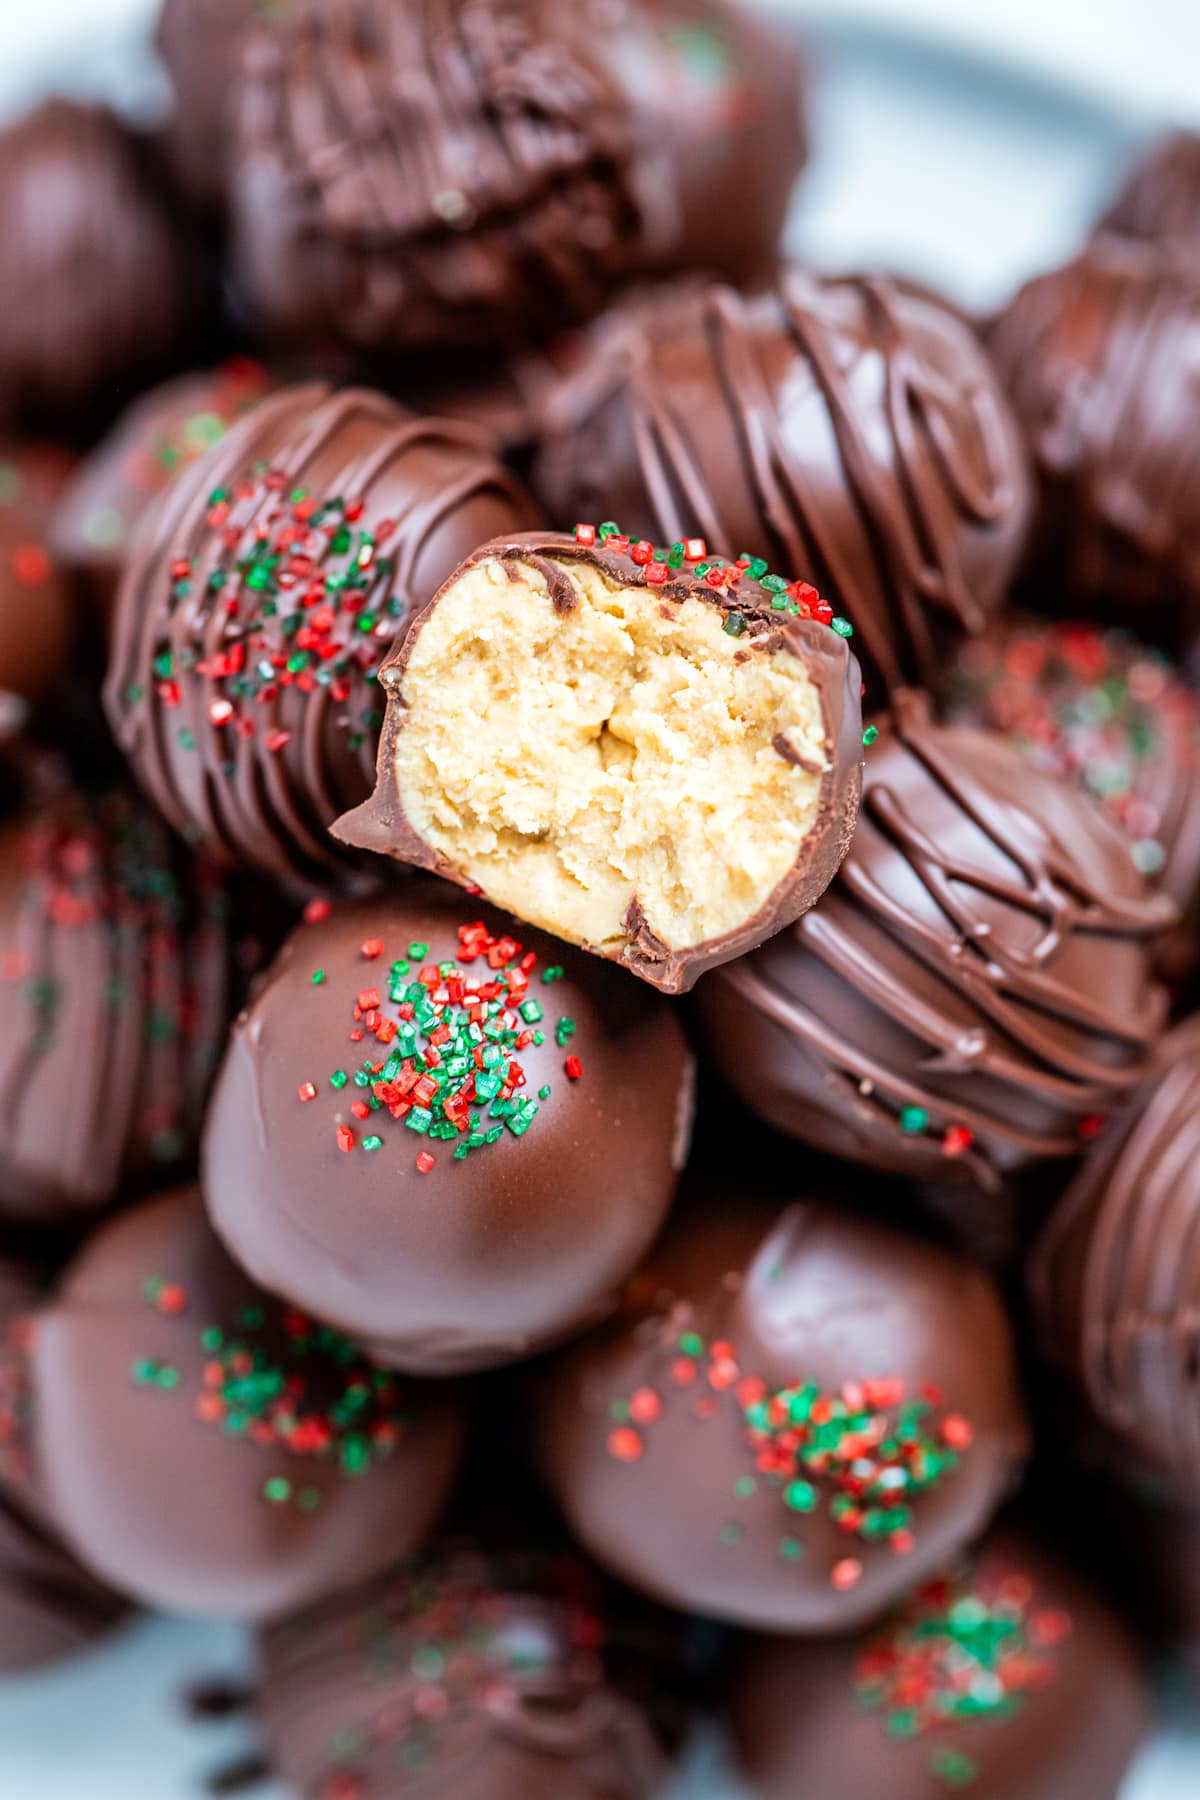 Chocolate covered peanut butter balls piled on a plate, with one cut in half on top, topped with drizzled chocolate and sprinkles on a table.